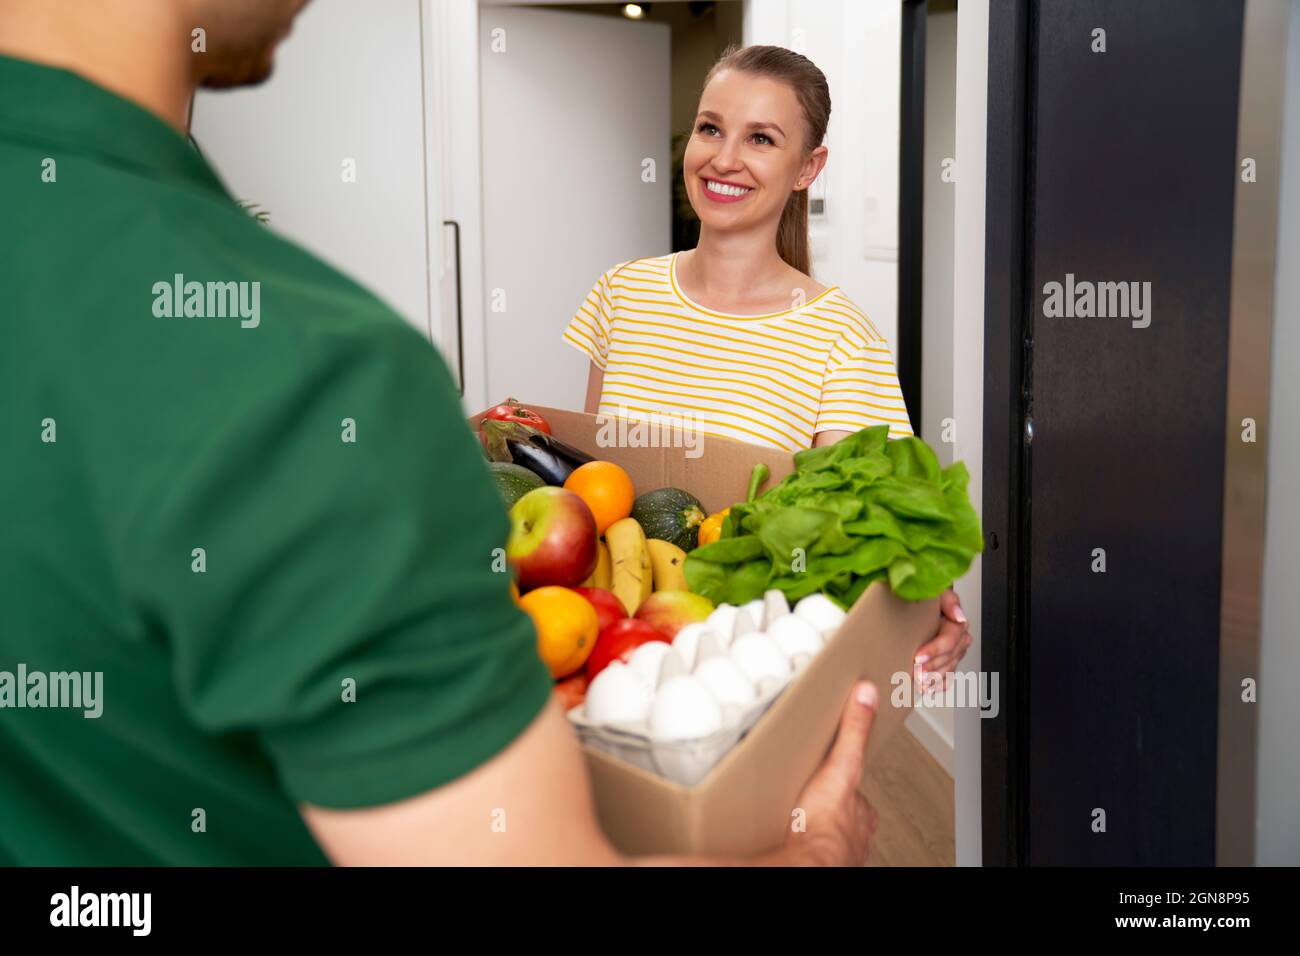 Smiling woman receiving groceries from delivery person at entrance Stock Photo